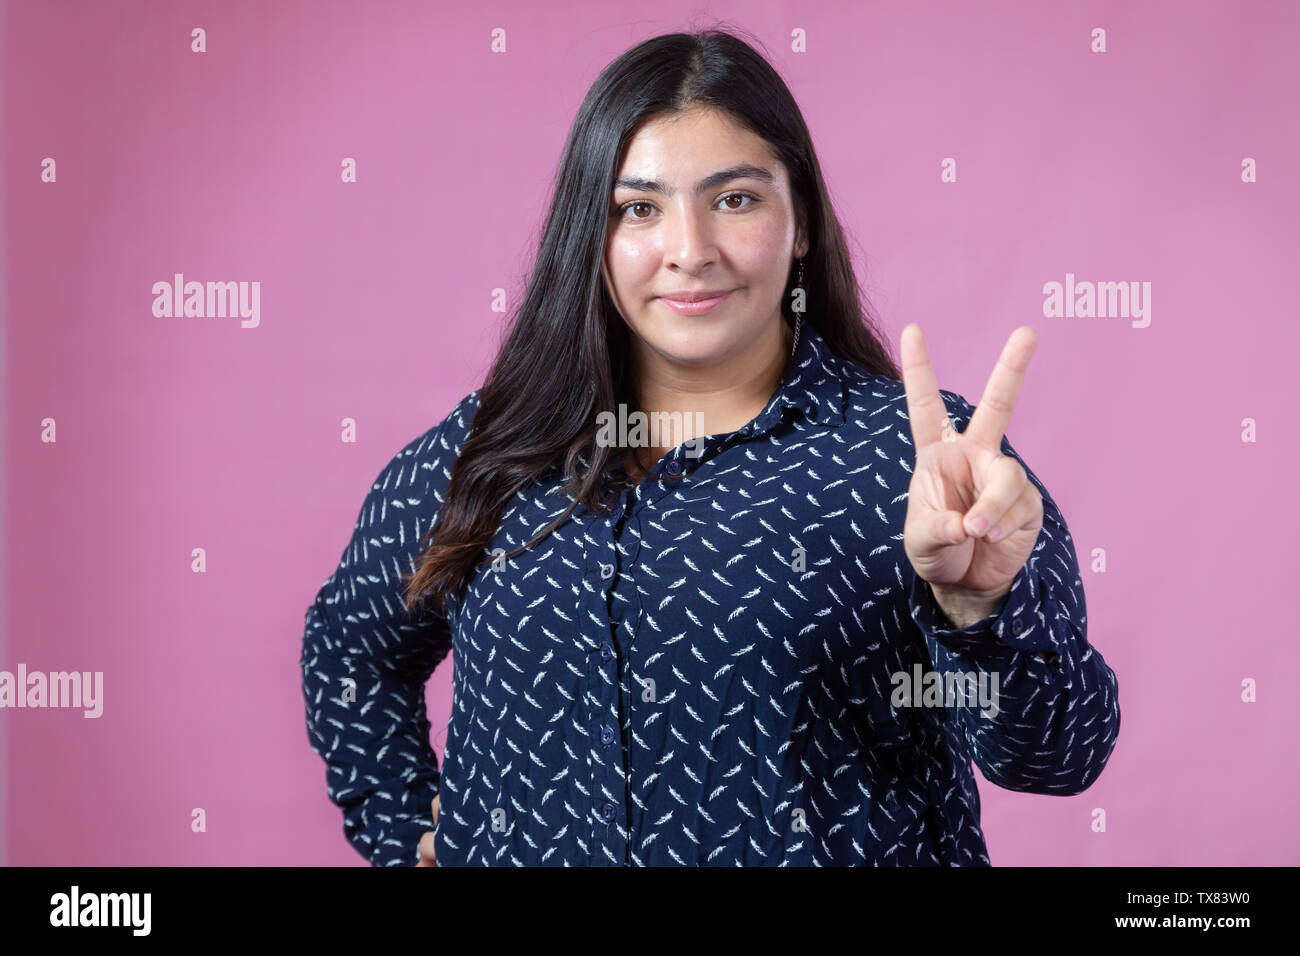 pretty curvy girl smiling showing number 2 with fingers or symbol of love and peace Stock Photo